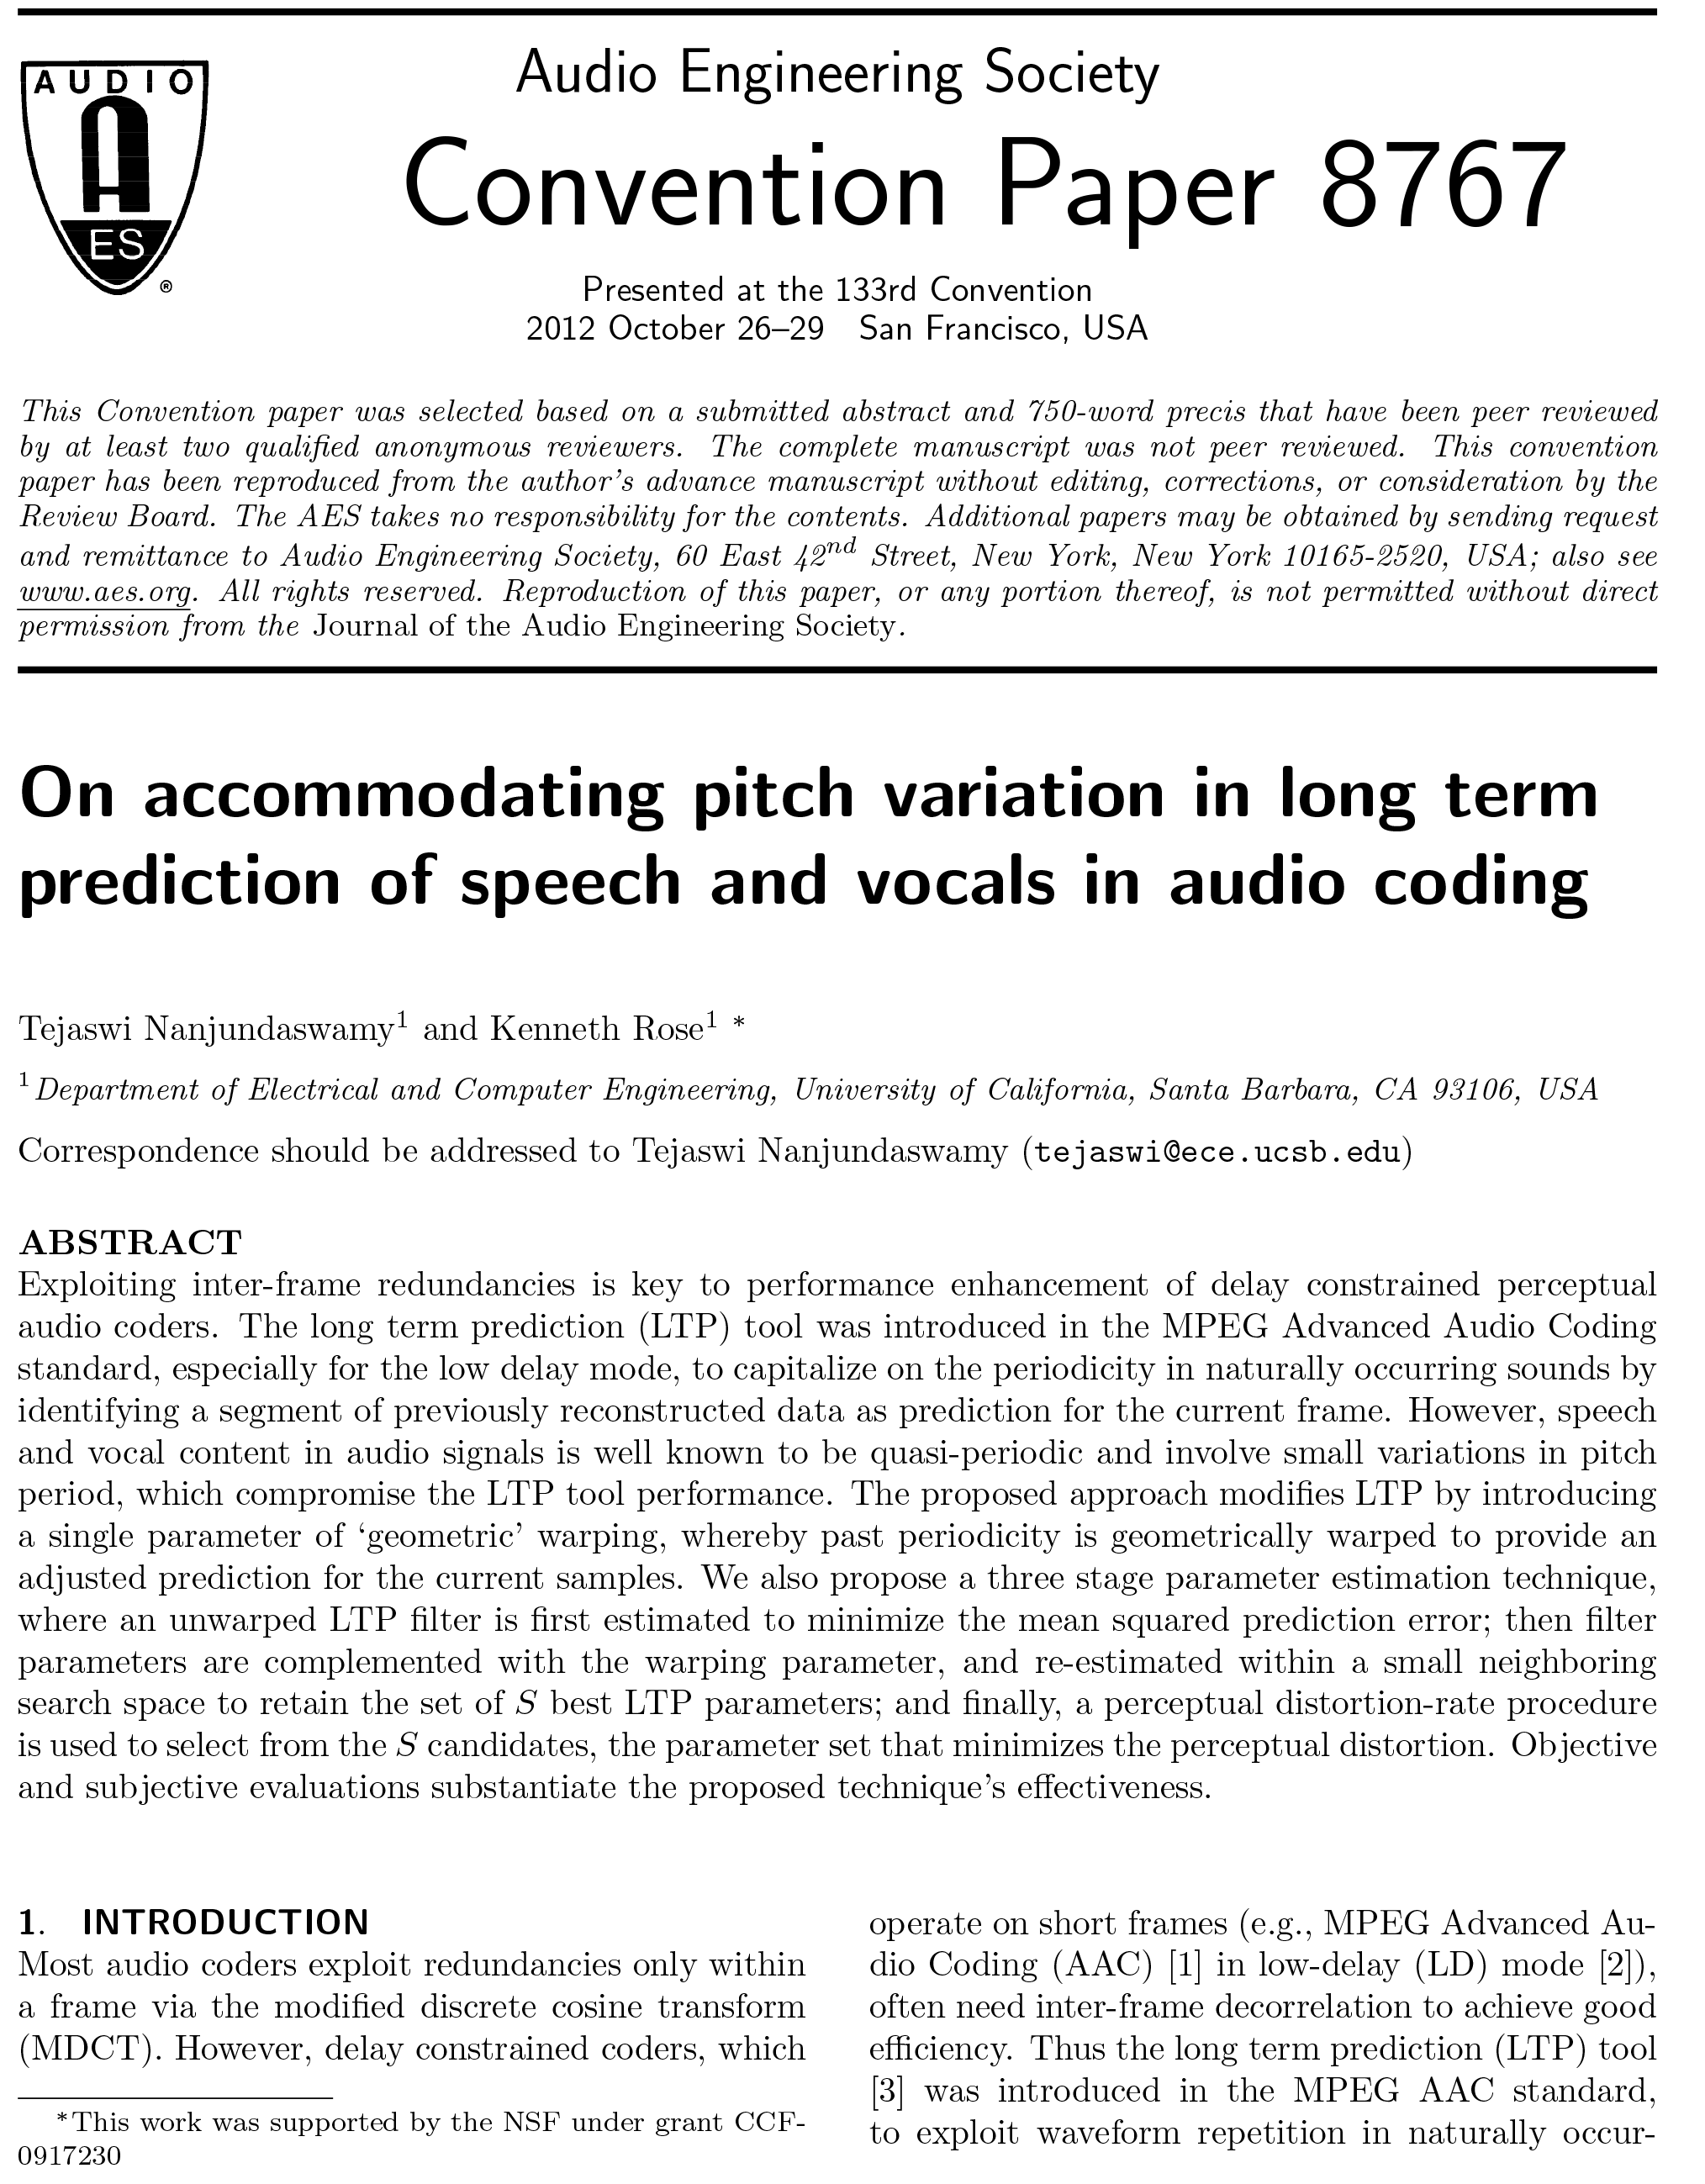 aes-e-library-on-accommodating-pitch-variation-in-long-term